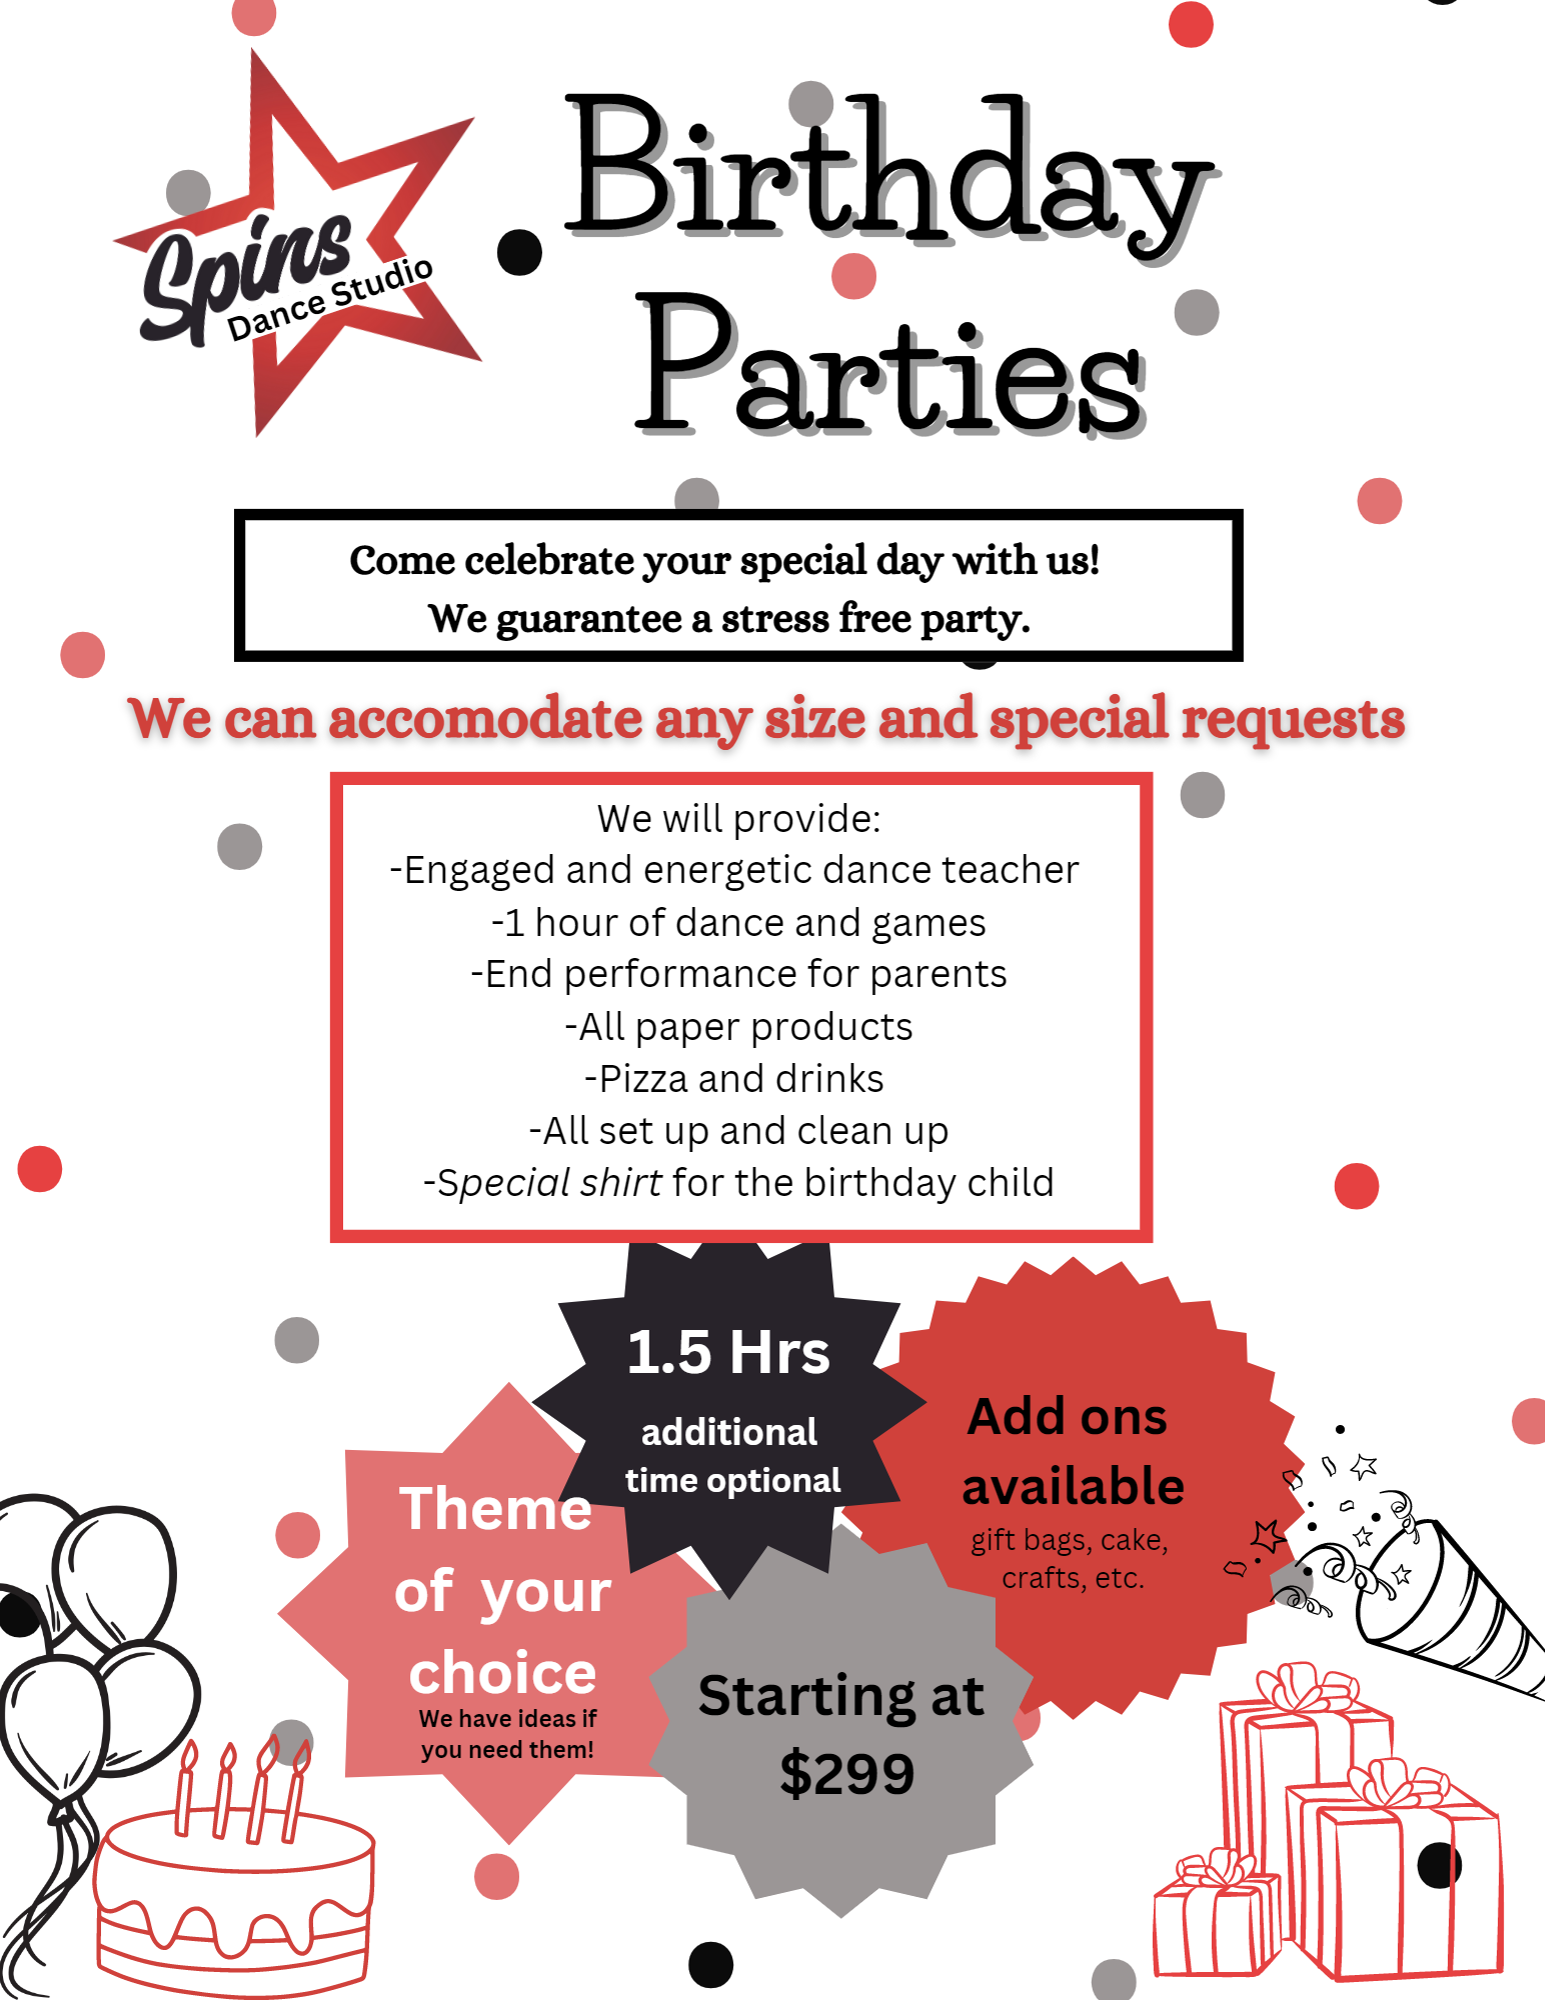 Birthday Parties — Rochester, NY — Spins Dance Studio Inc.